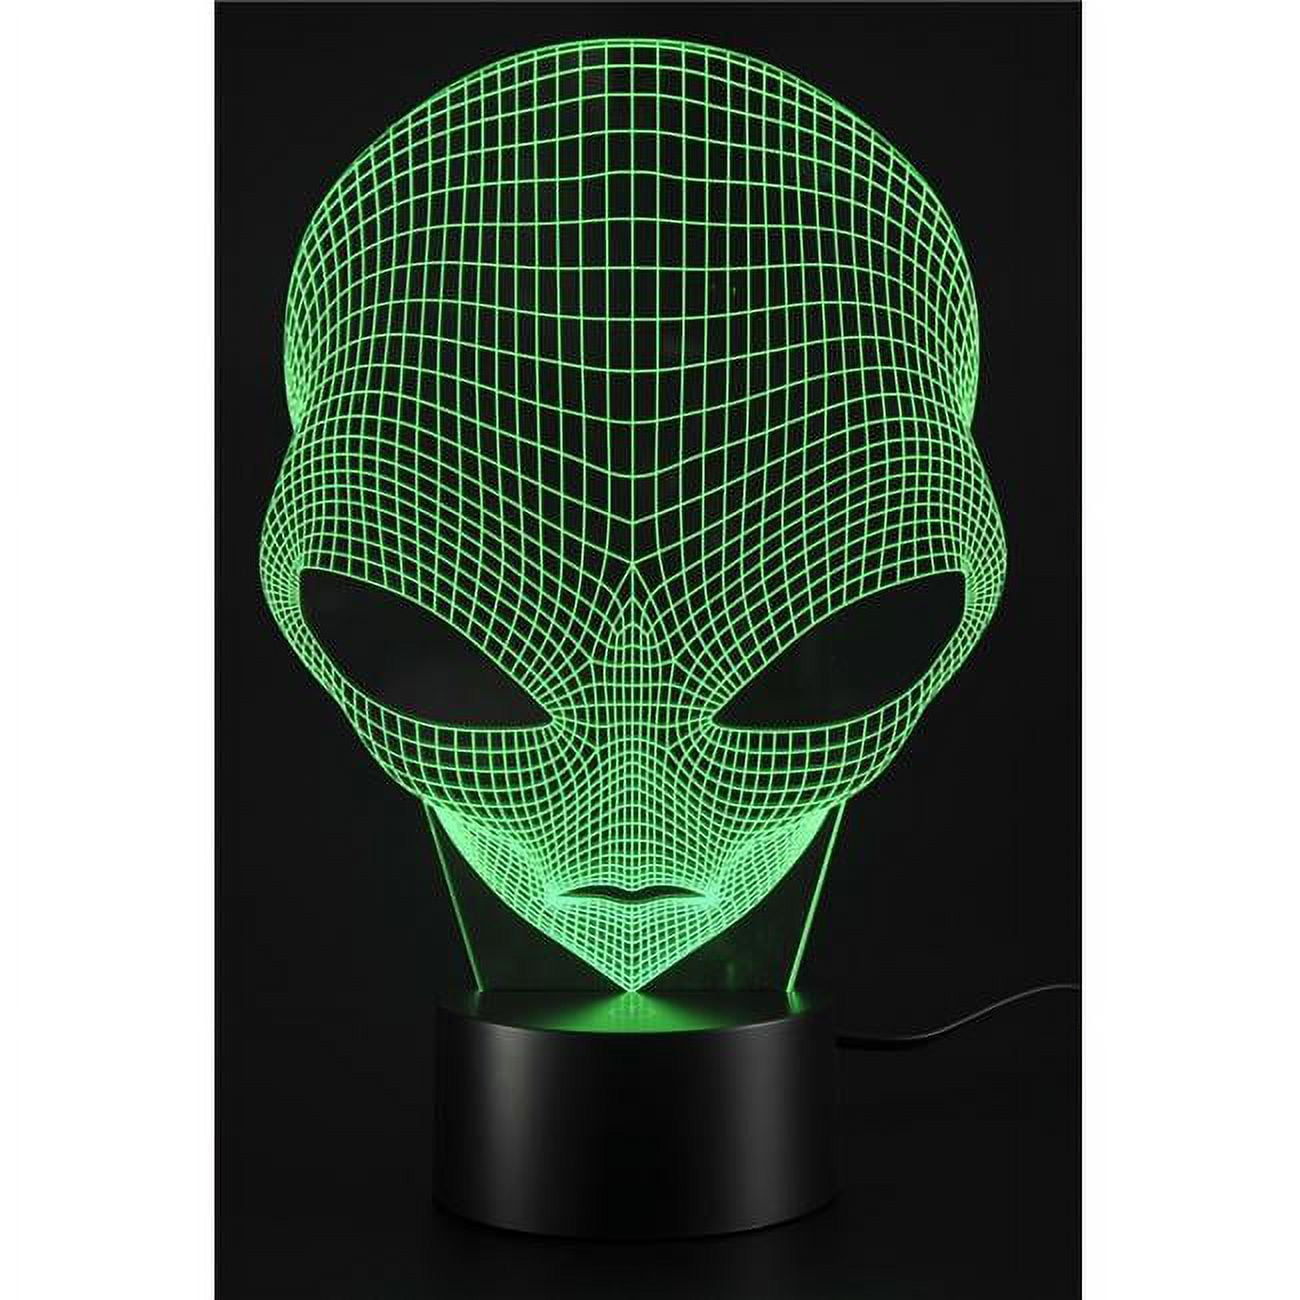 Picture of AZImport TG3048 3D Lamp USB Power Amazing Optical Illusion 3D Grow LED Lamp Alien Shapes, Assorted Color